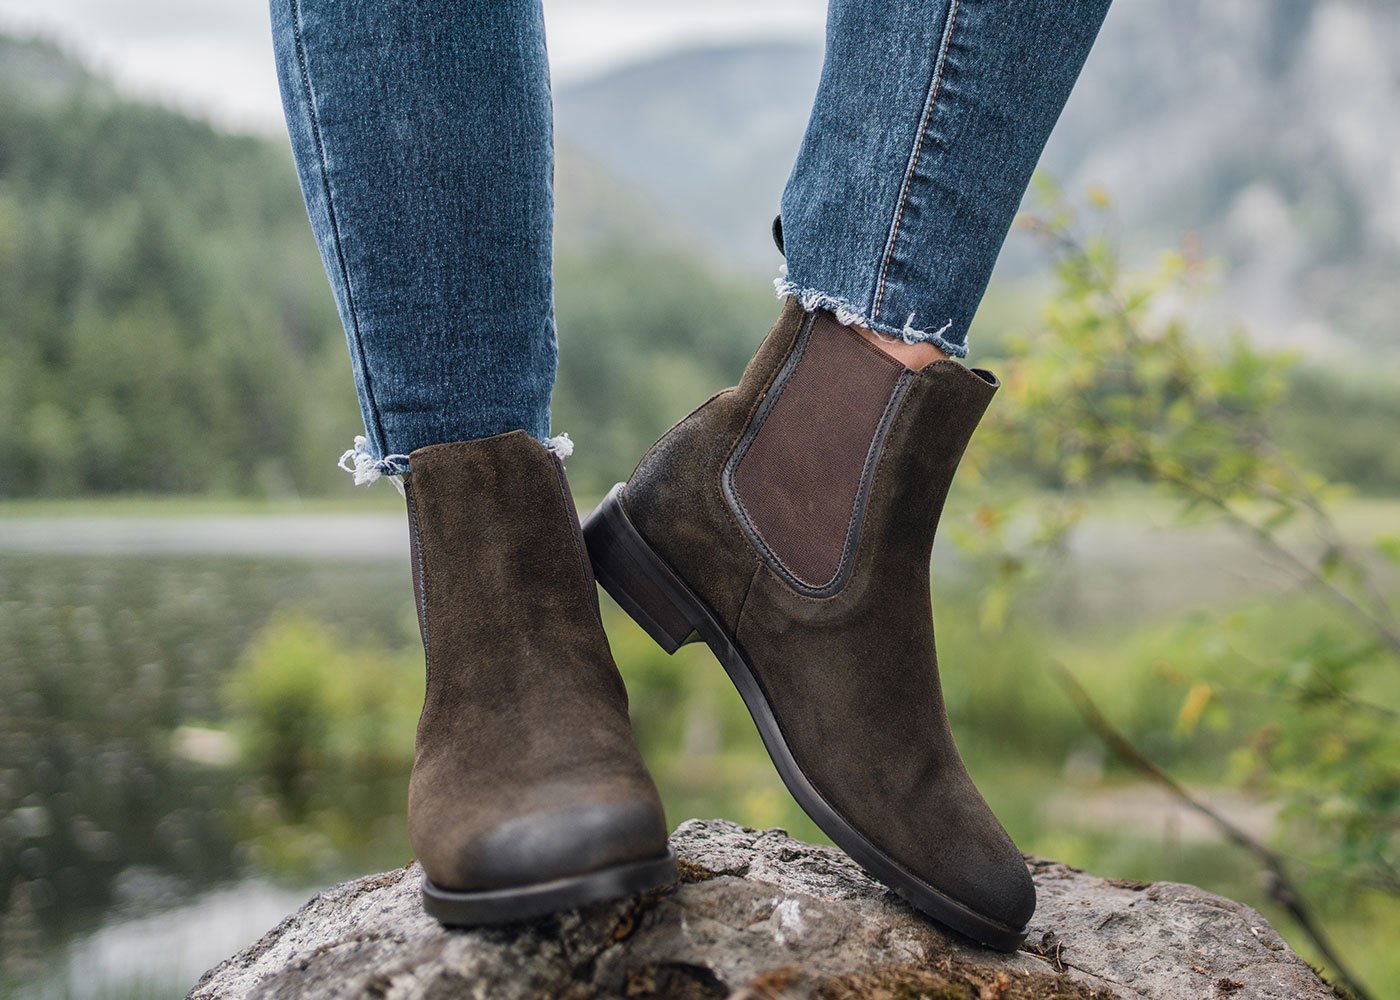 The Best Women's Boots to Buy in 2022 - Thursday Boot Company